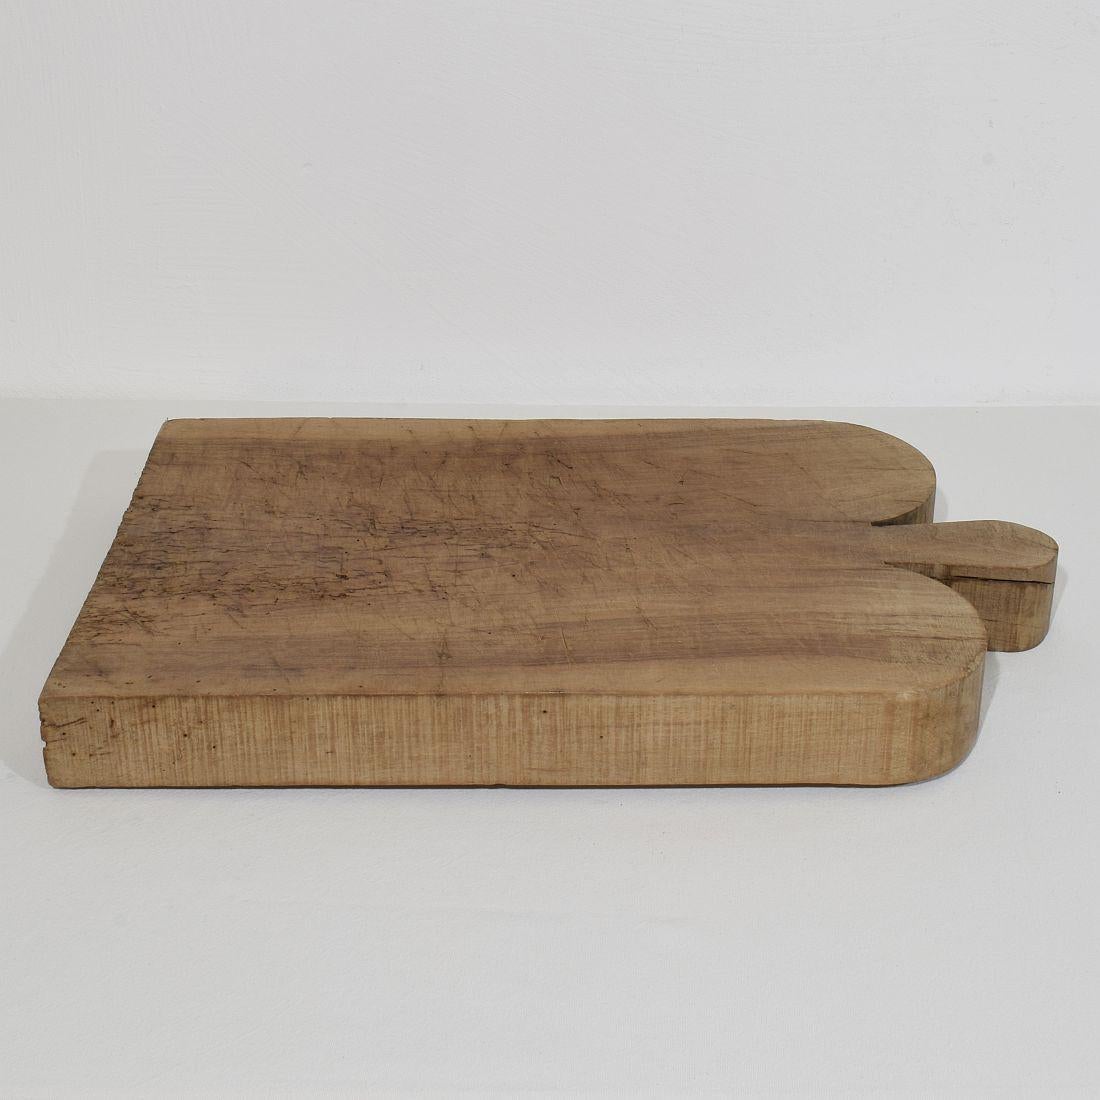 French 19th Century, Thick Wooden Chopping or Cutting Board 12